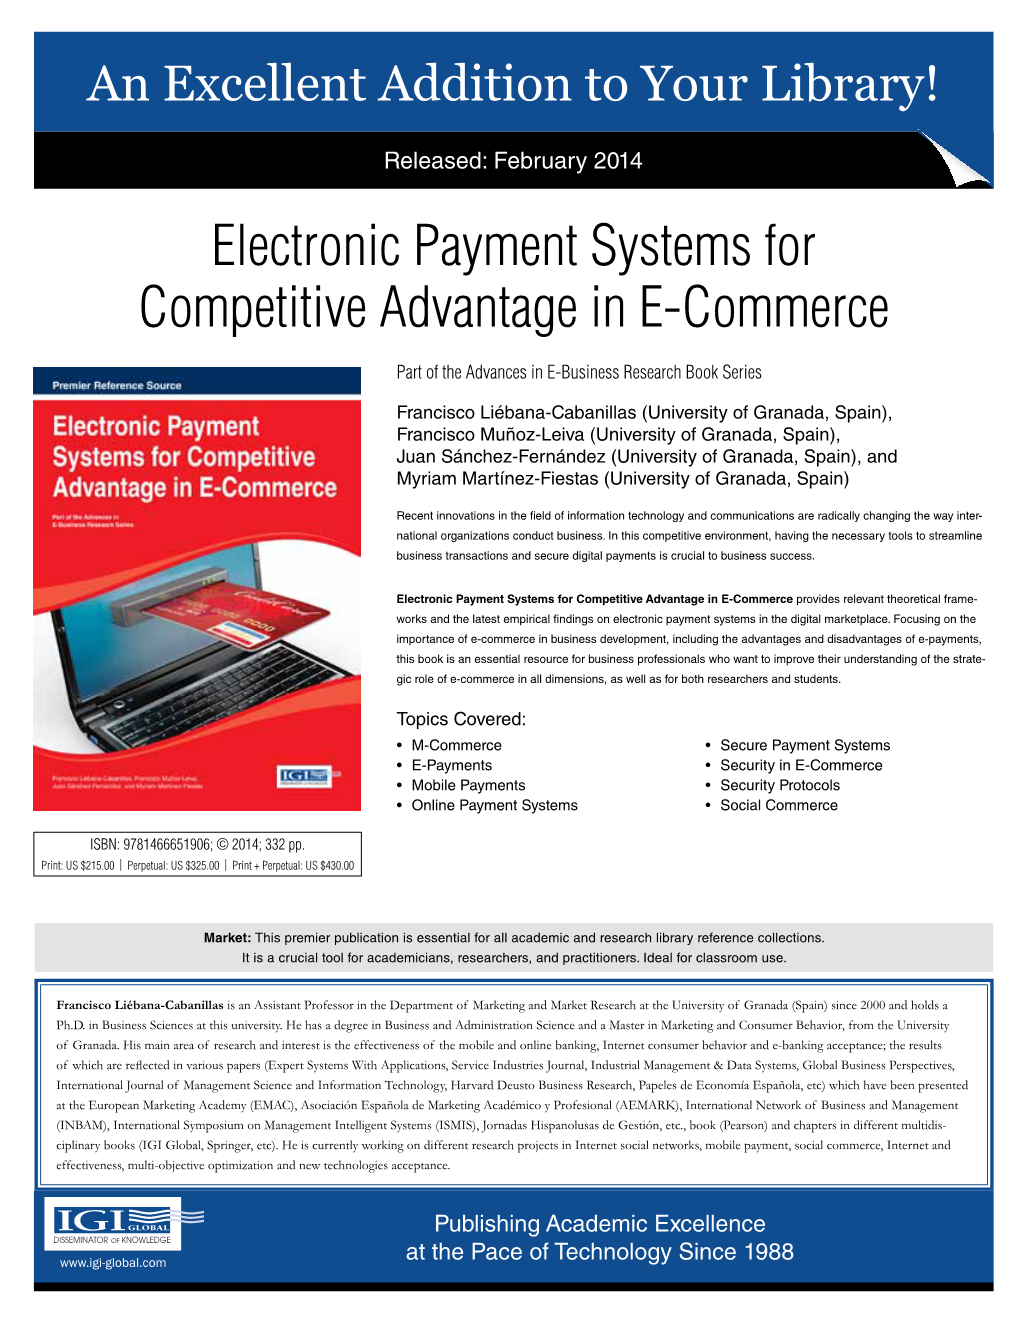 Electronic Payment Systems for Competitive Advantage in E-Commerce